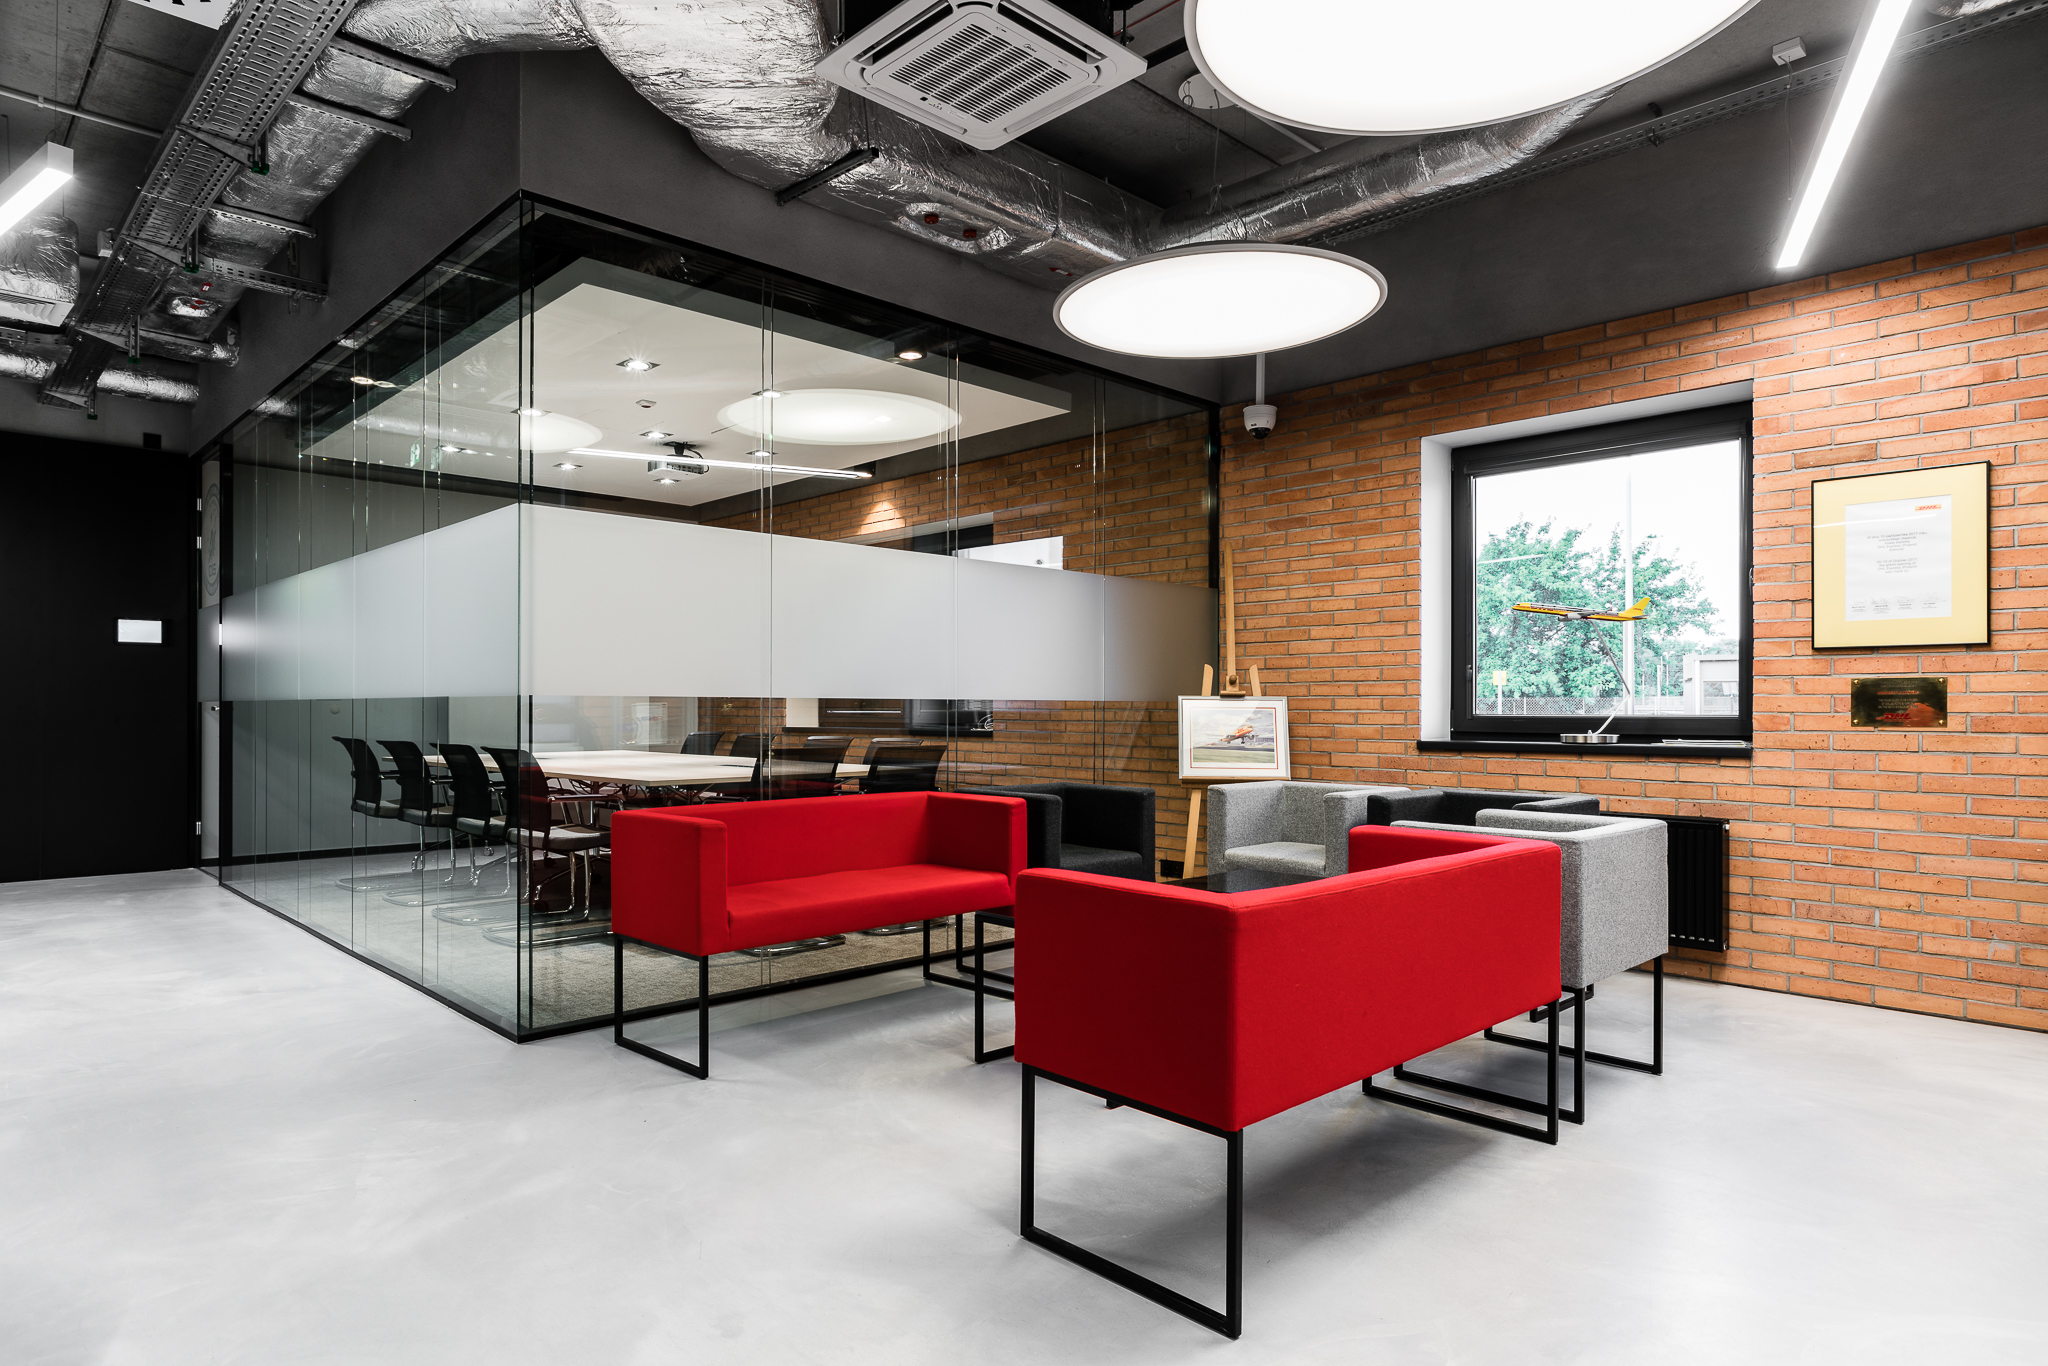 A Tour of DHL’s Modern Warsaw Office